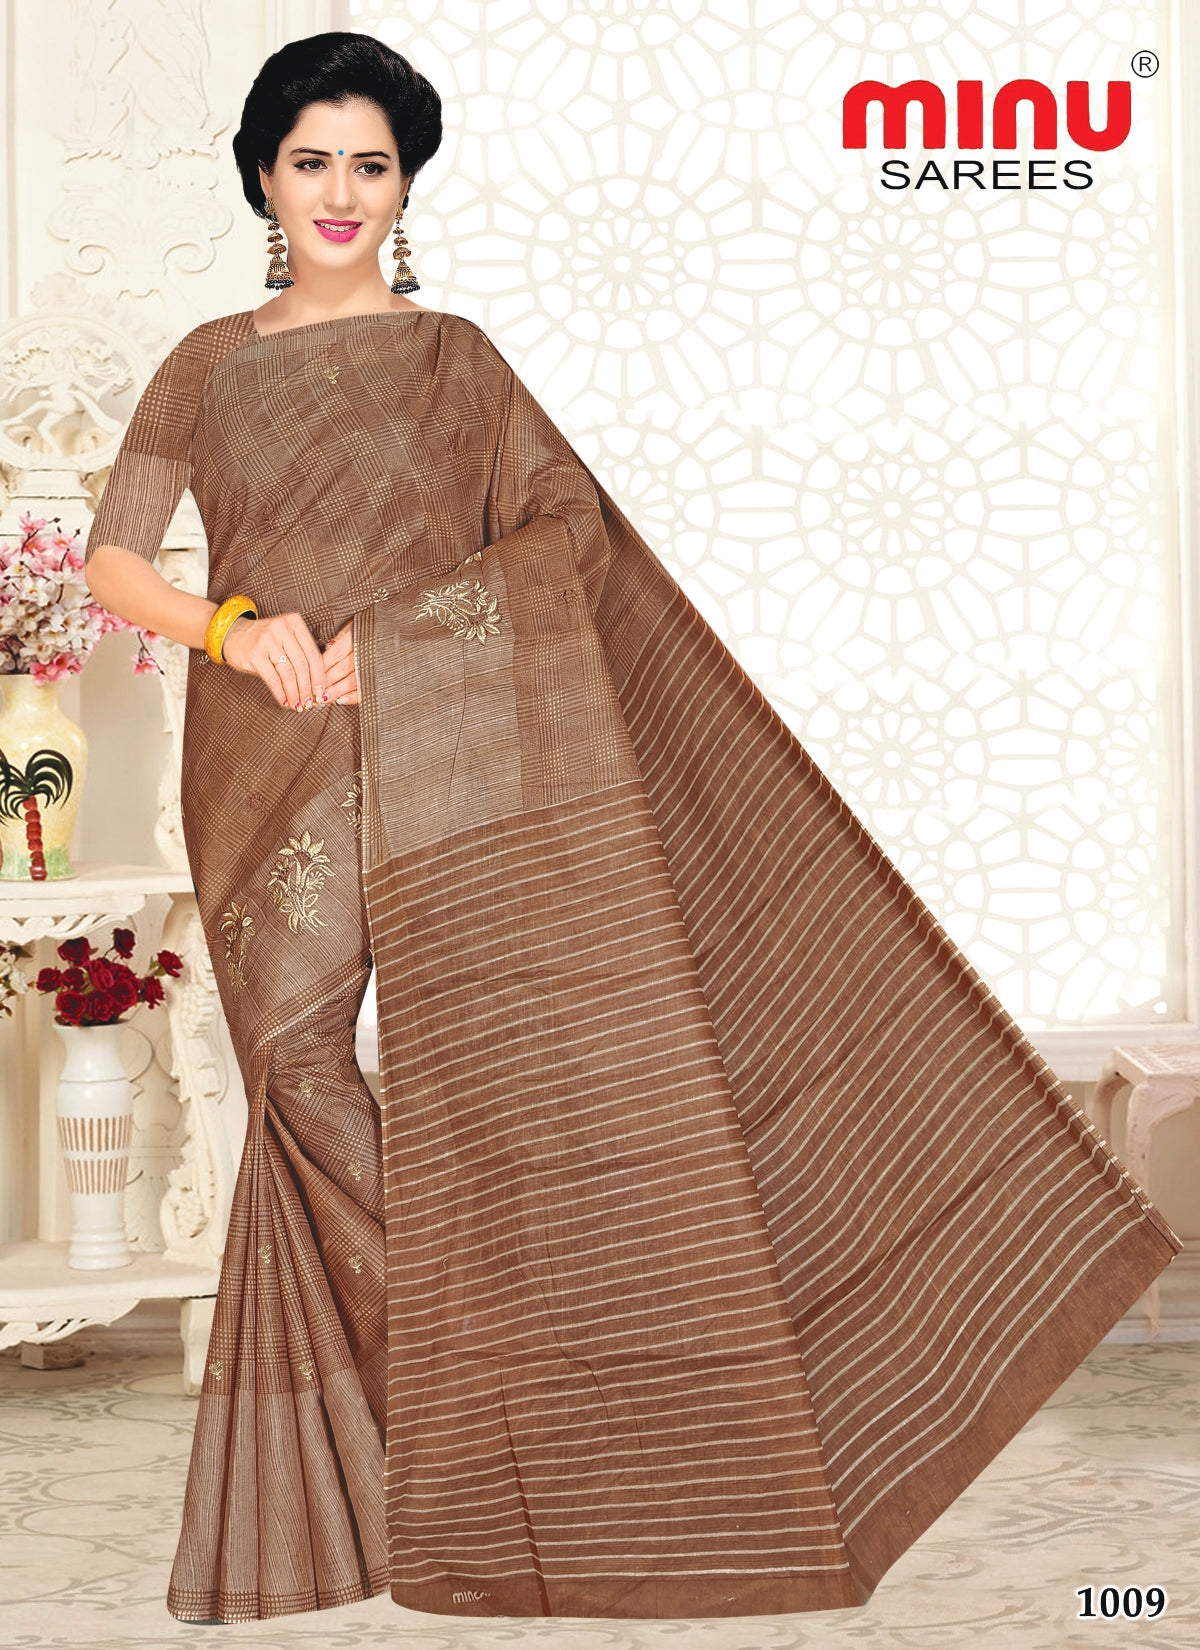 Durga puja special saree collection for online resellers